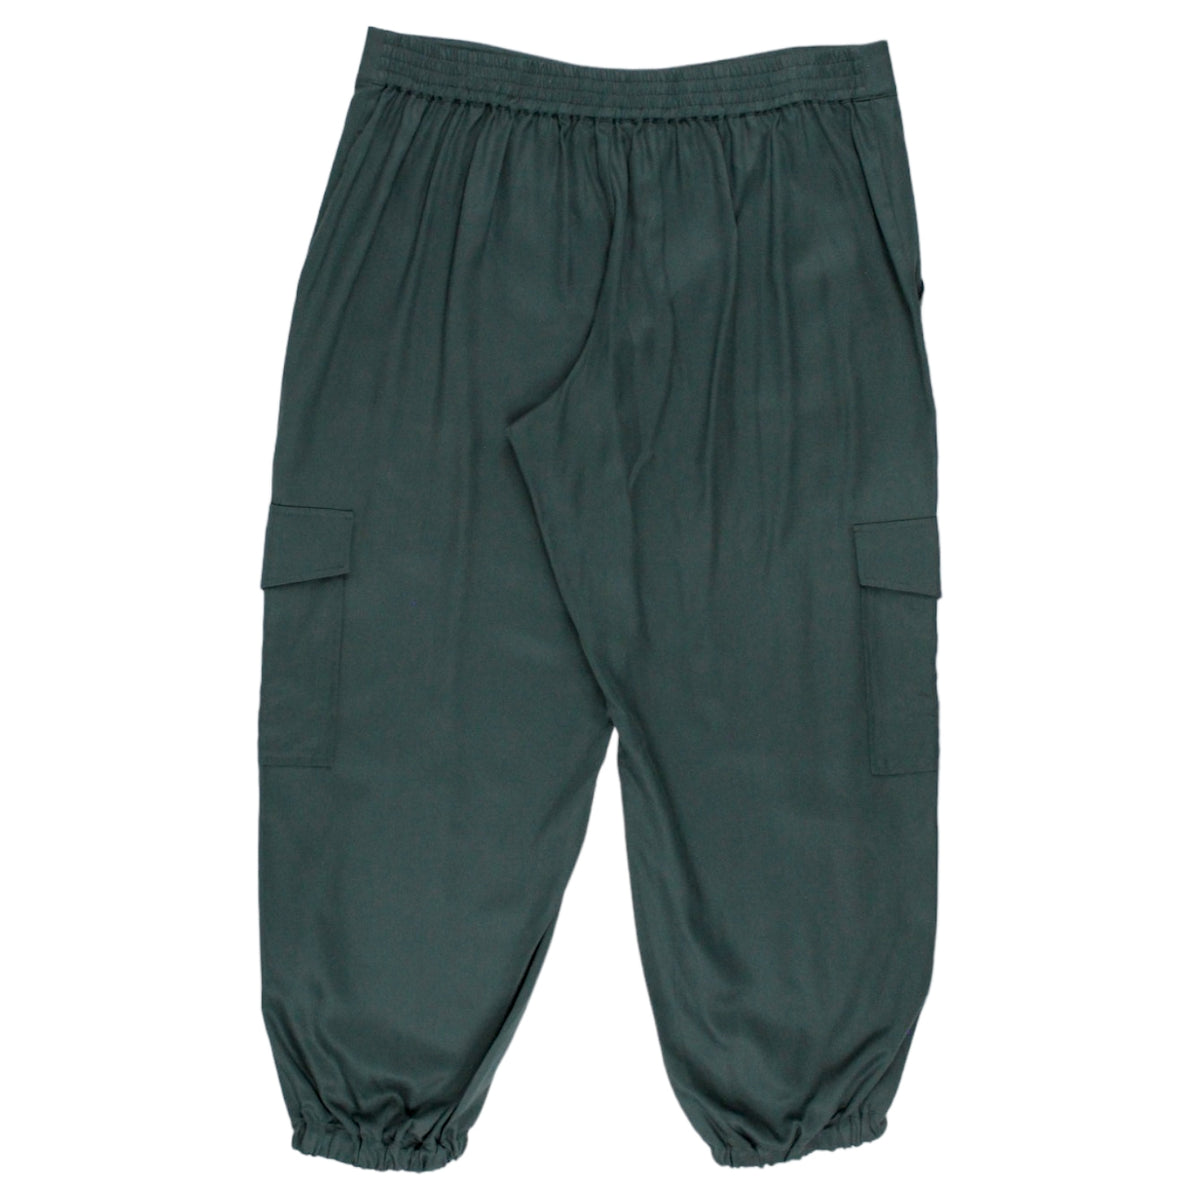 NRBY Green Twill Cargo Style Pants